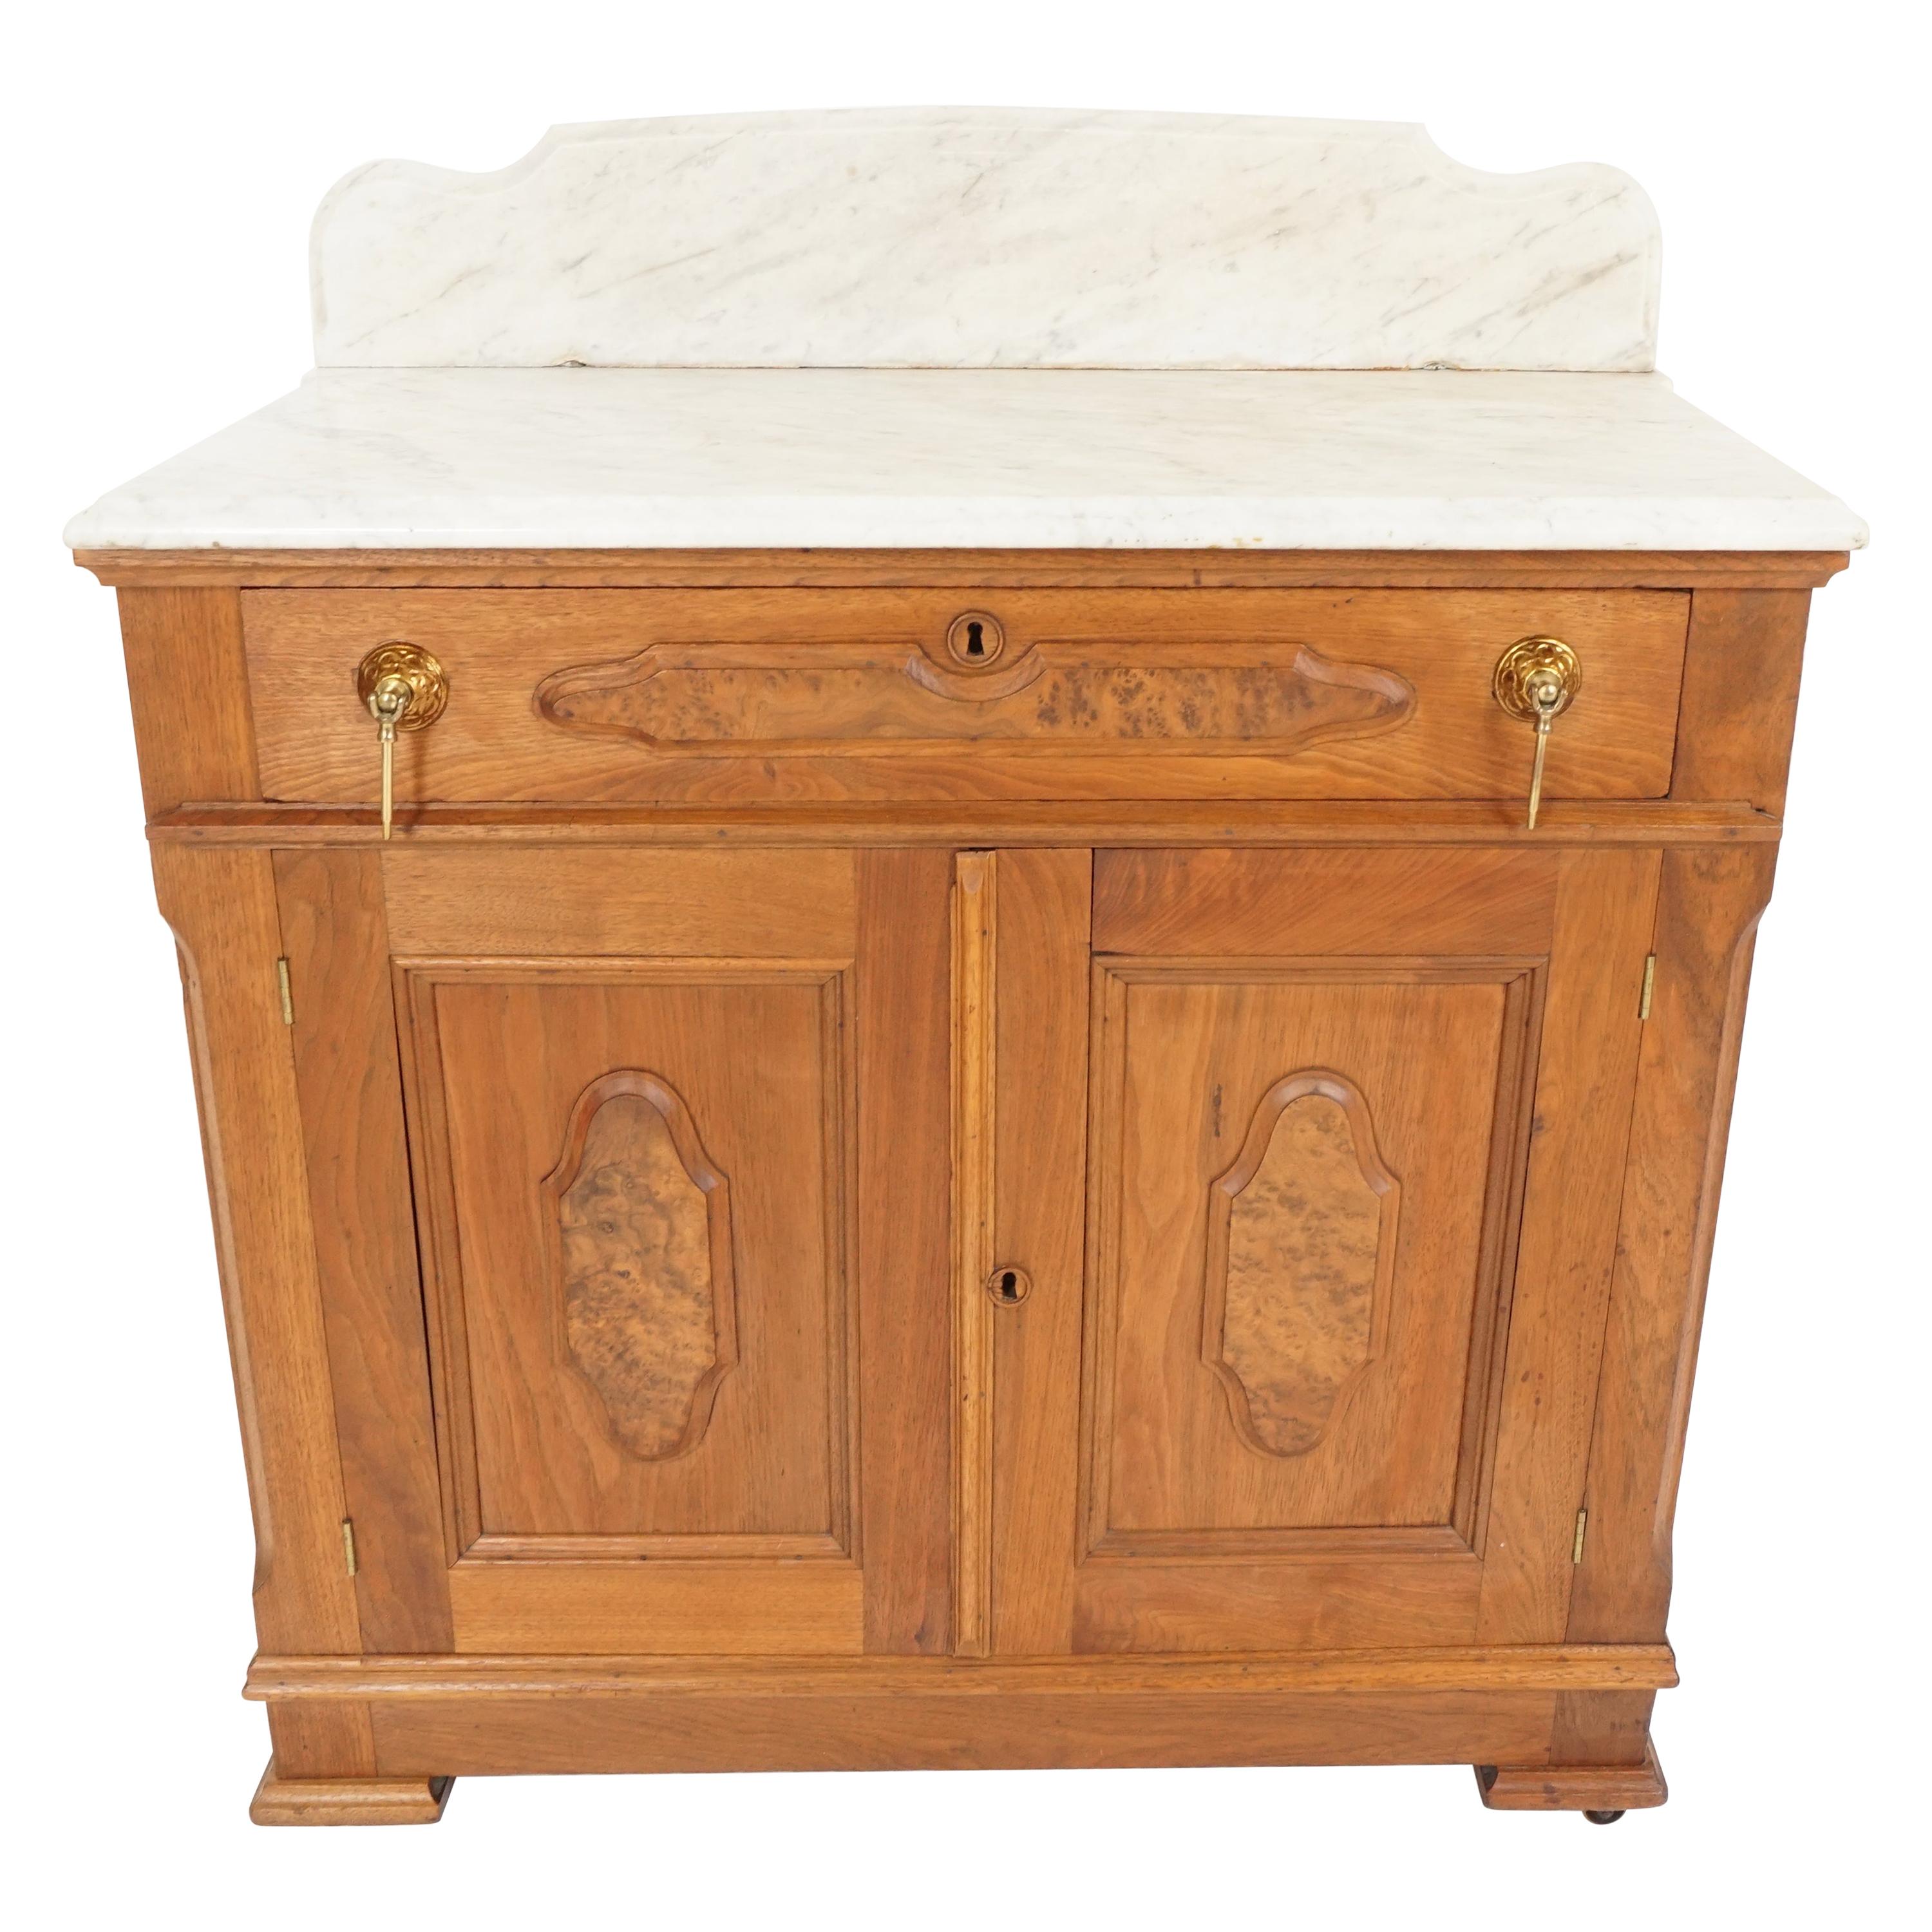 Antique Victorian Washstand, East Lake, Walnut Marble Top, American 1880, B2518